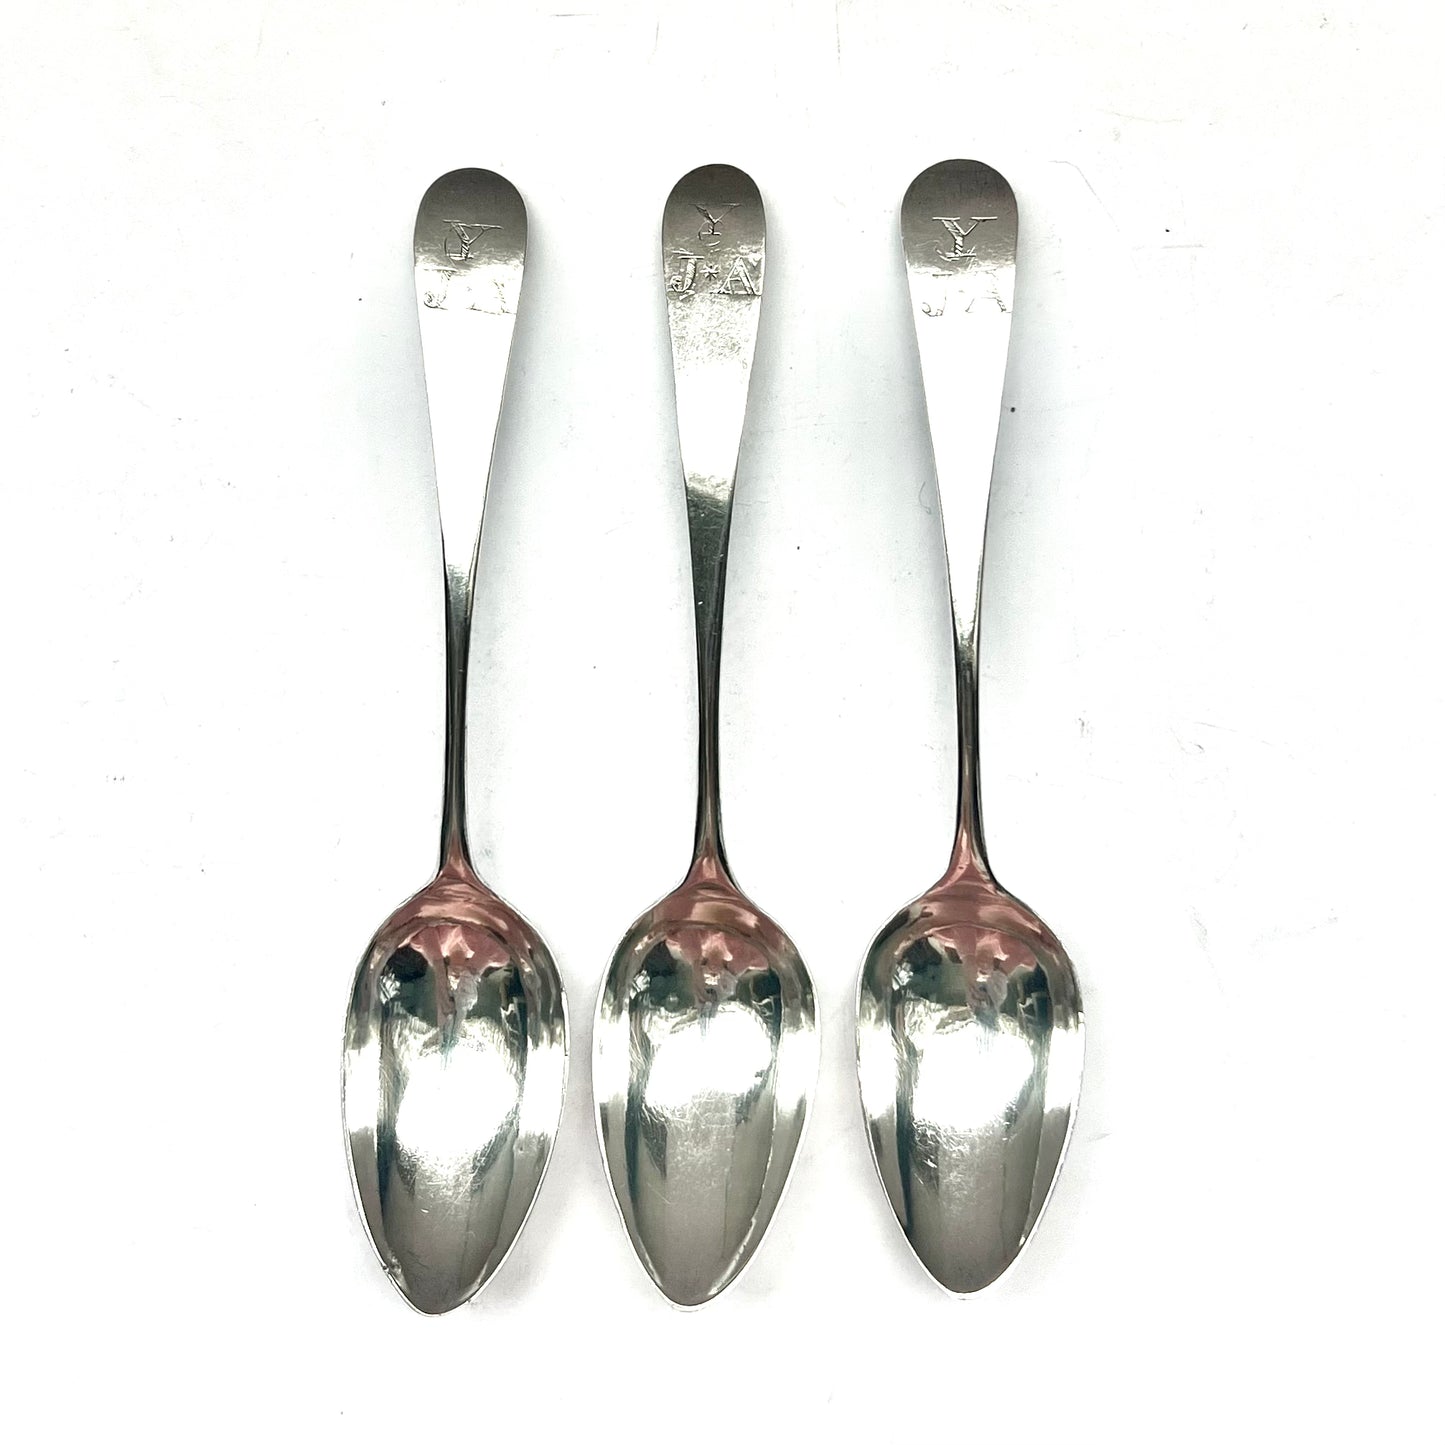 3 George III English provincial silver spoons with marks for Richard Ferris, Exeter circa 1789 to 1810